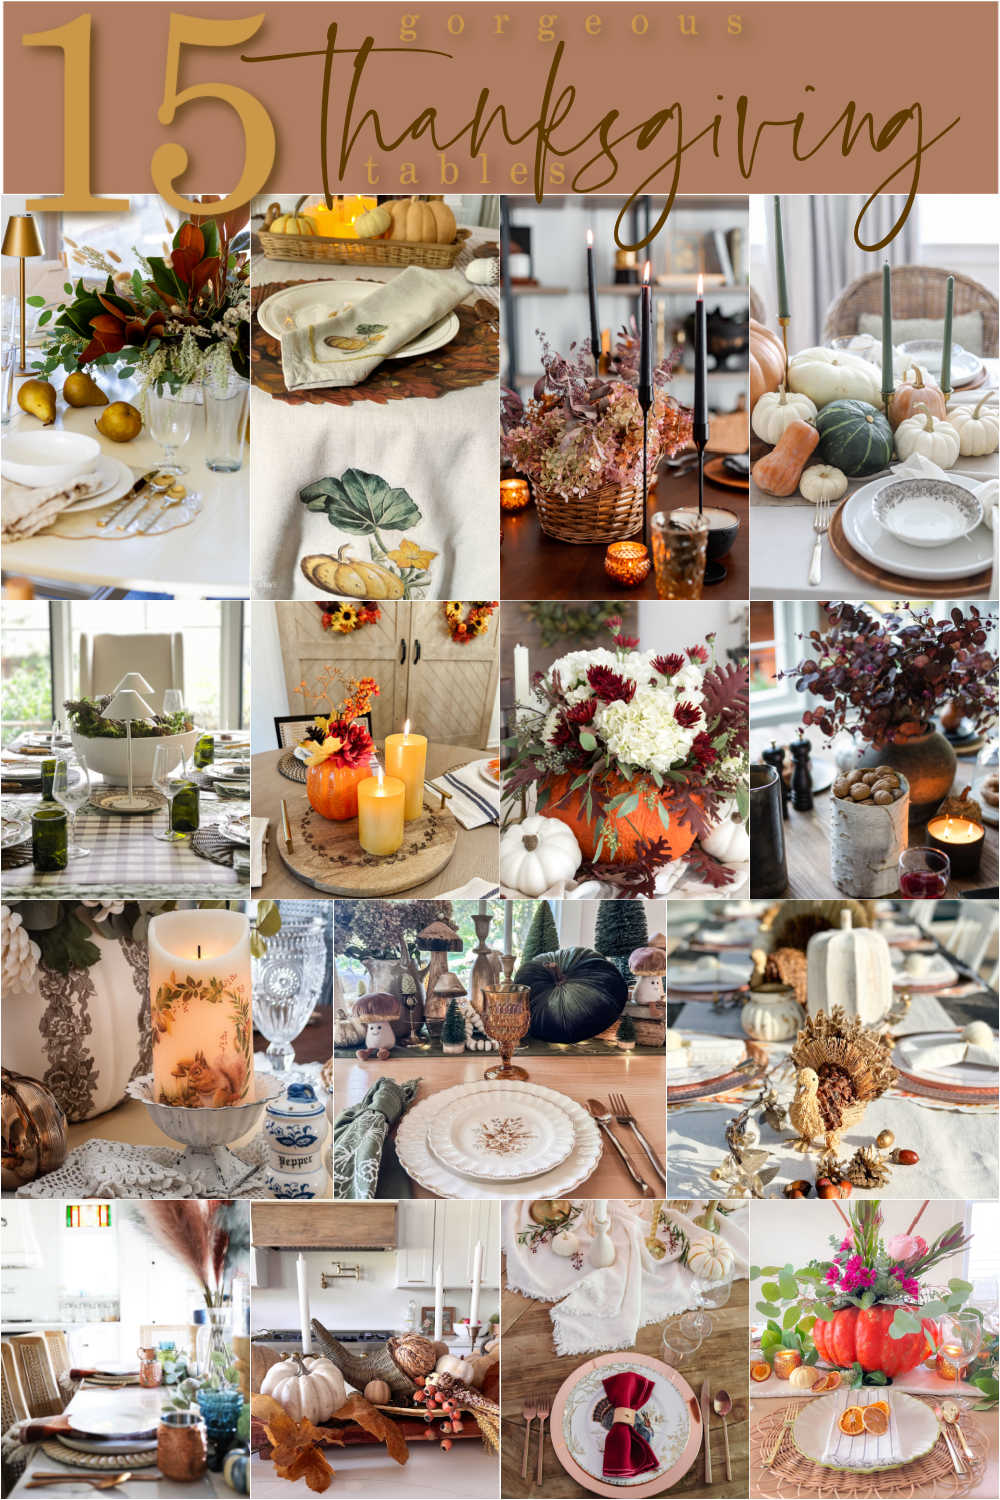 Thanksgiving table Pinterest Pin collage